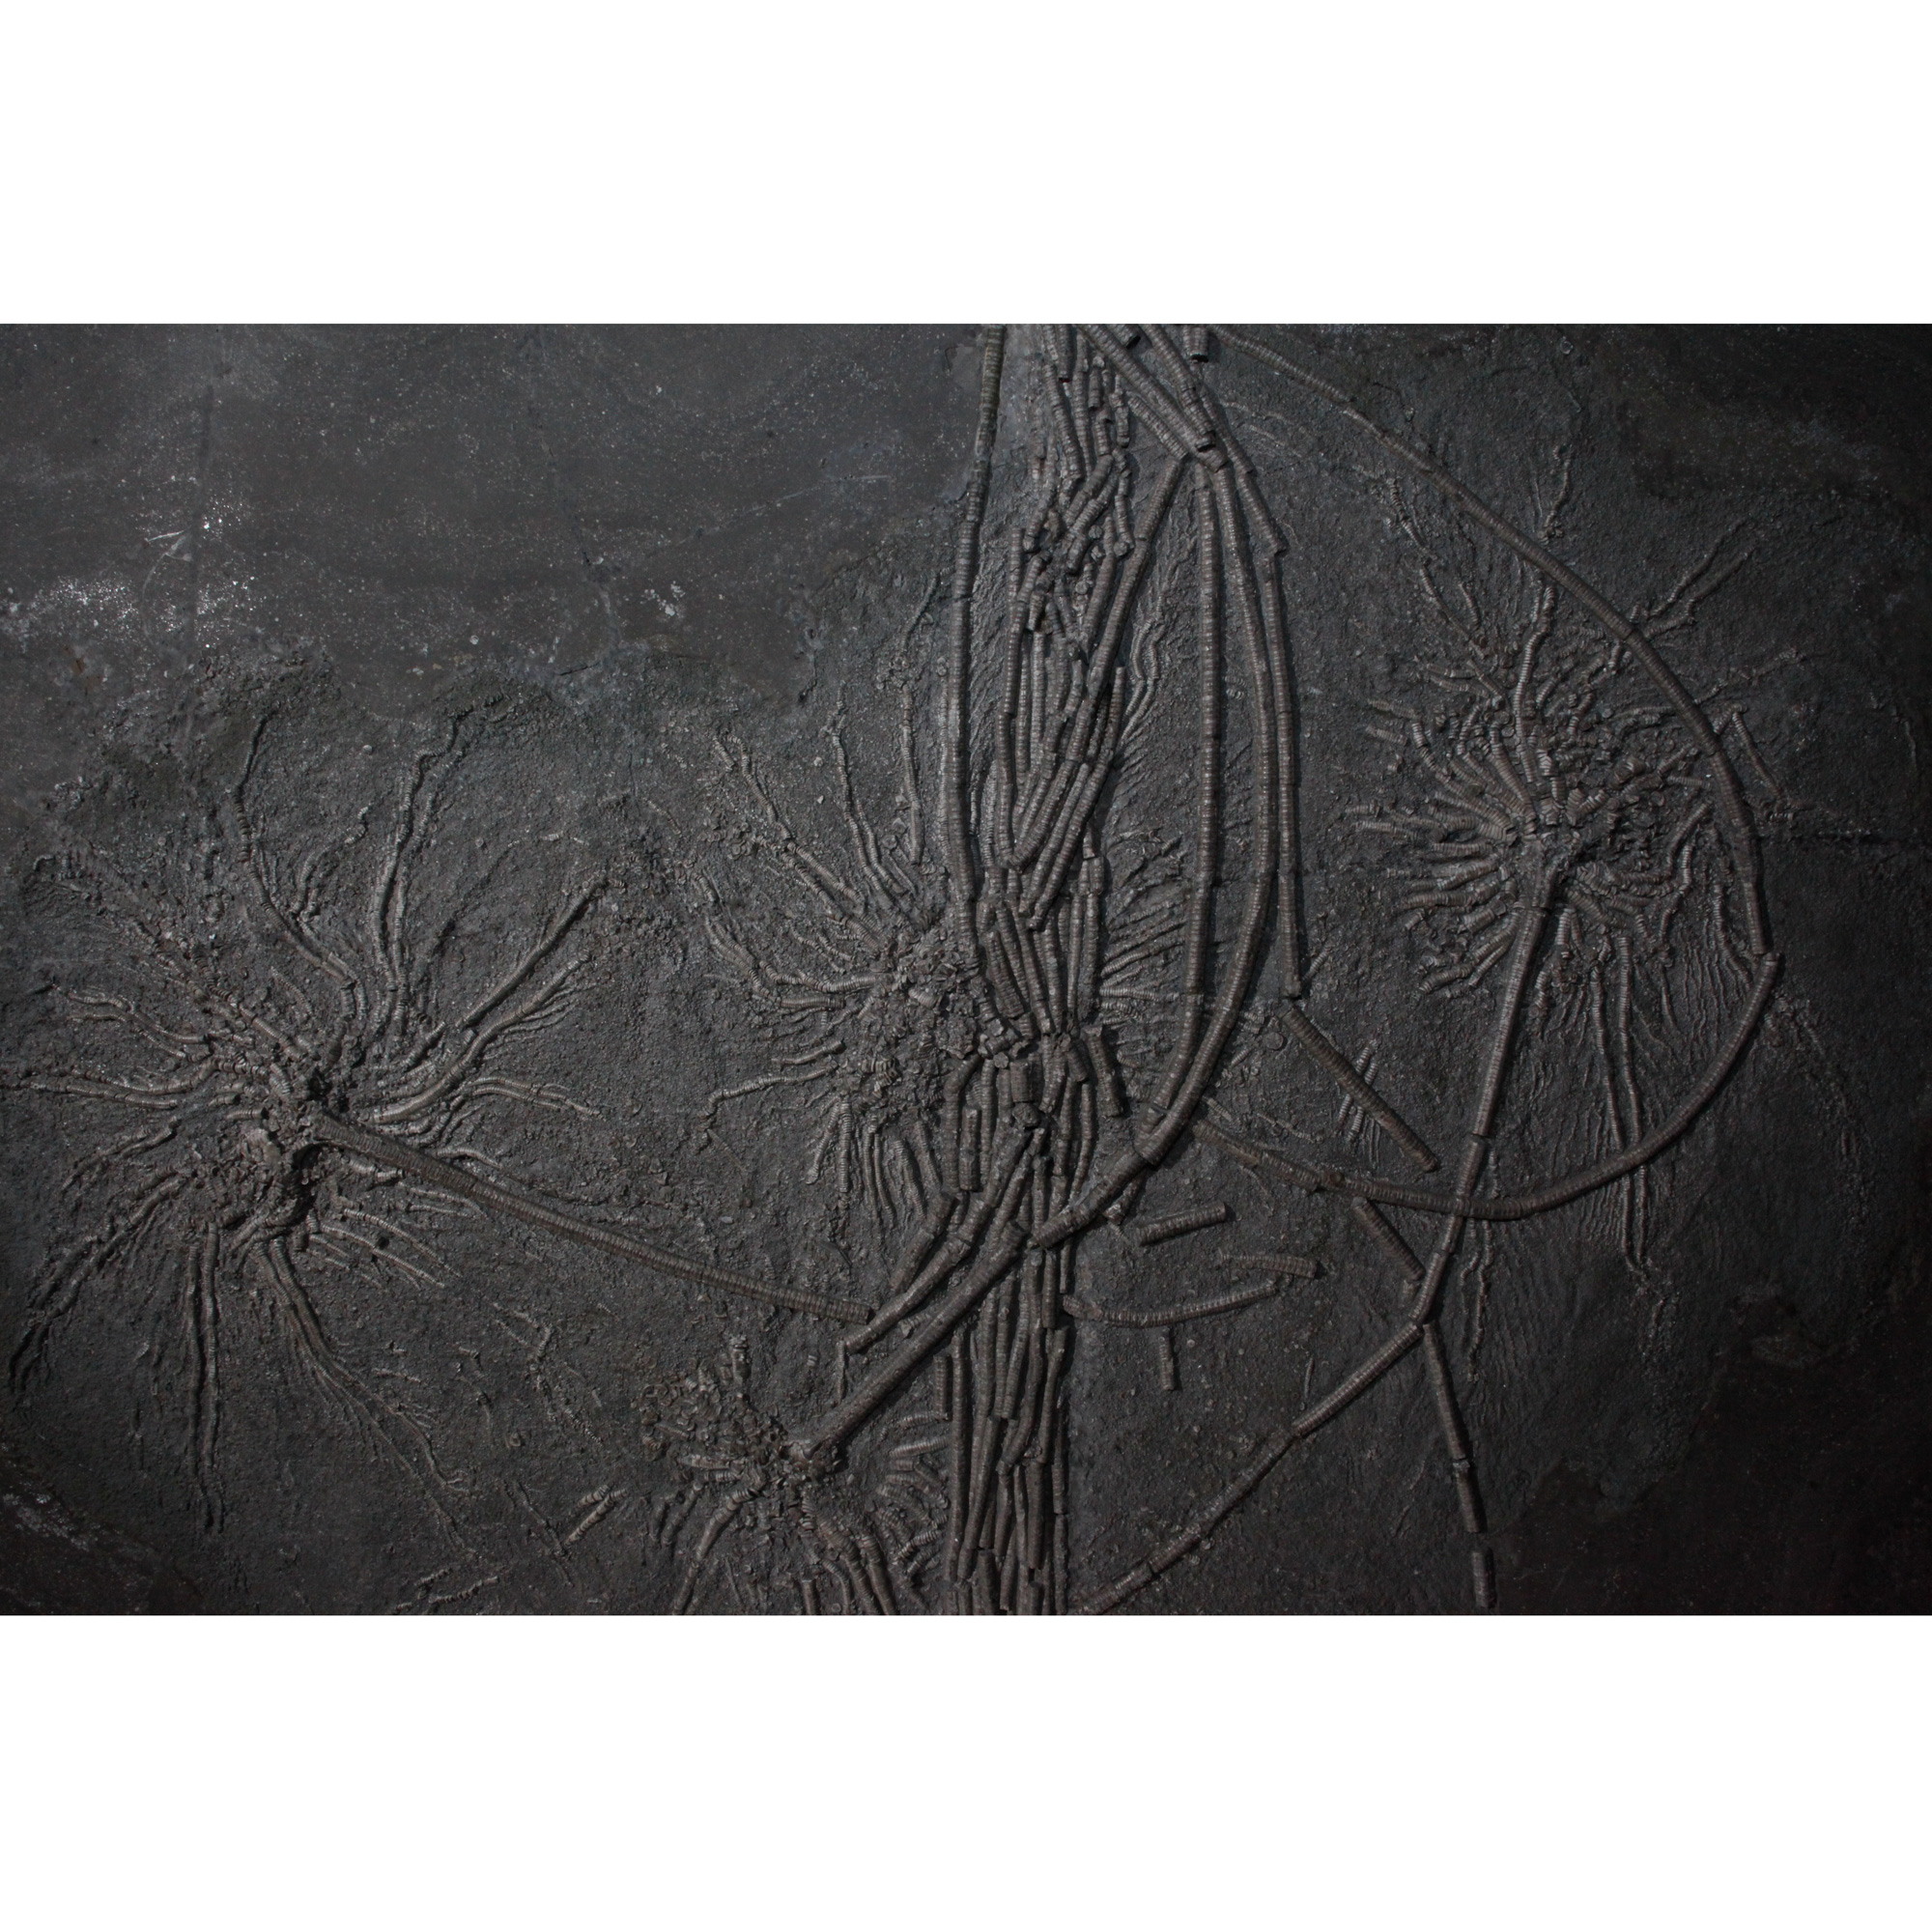 Fossil Crinoid Plate